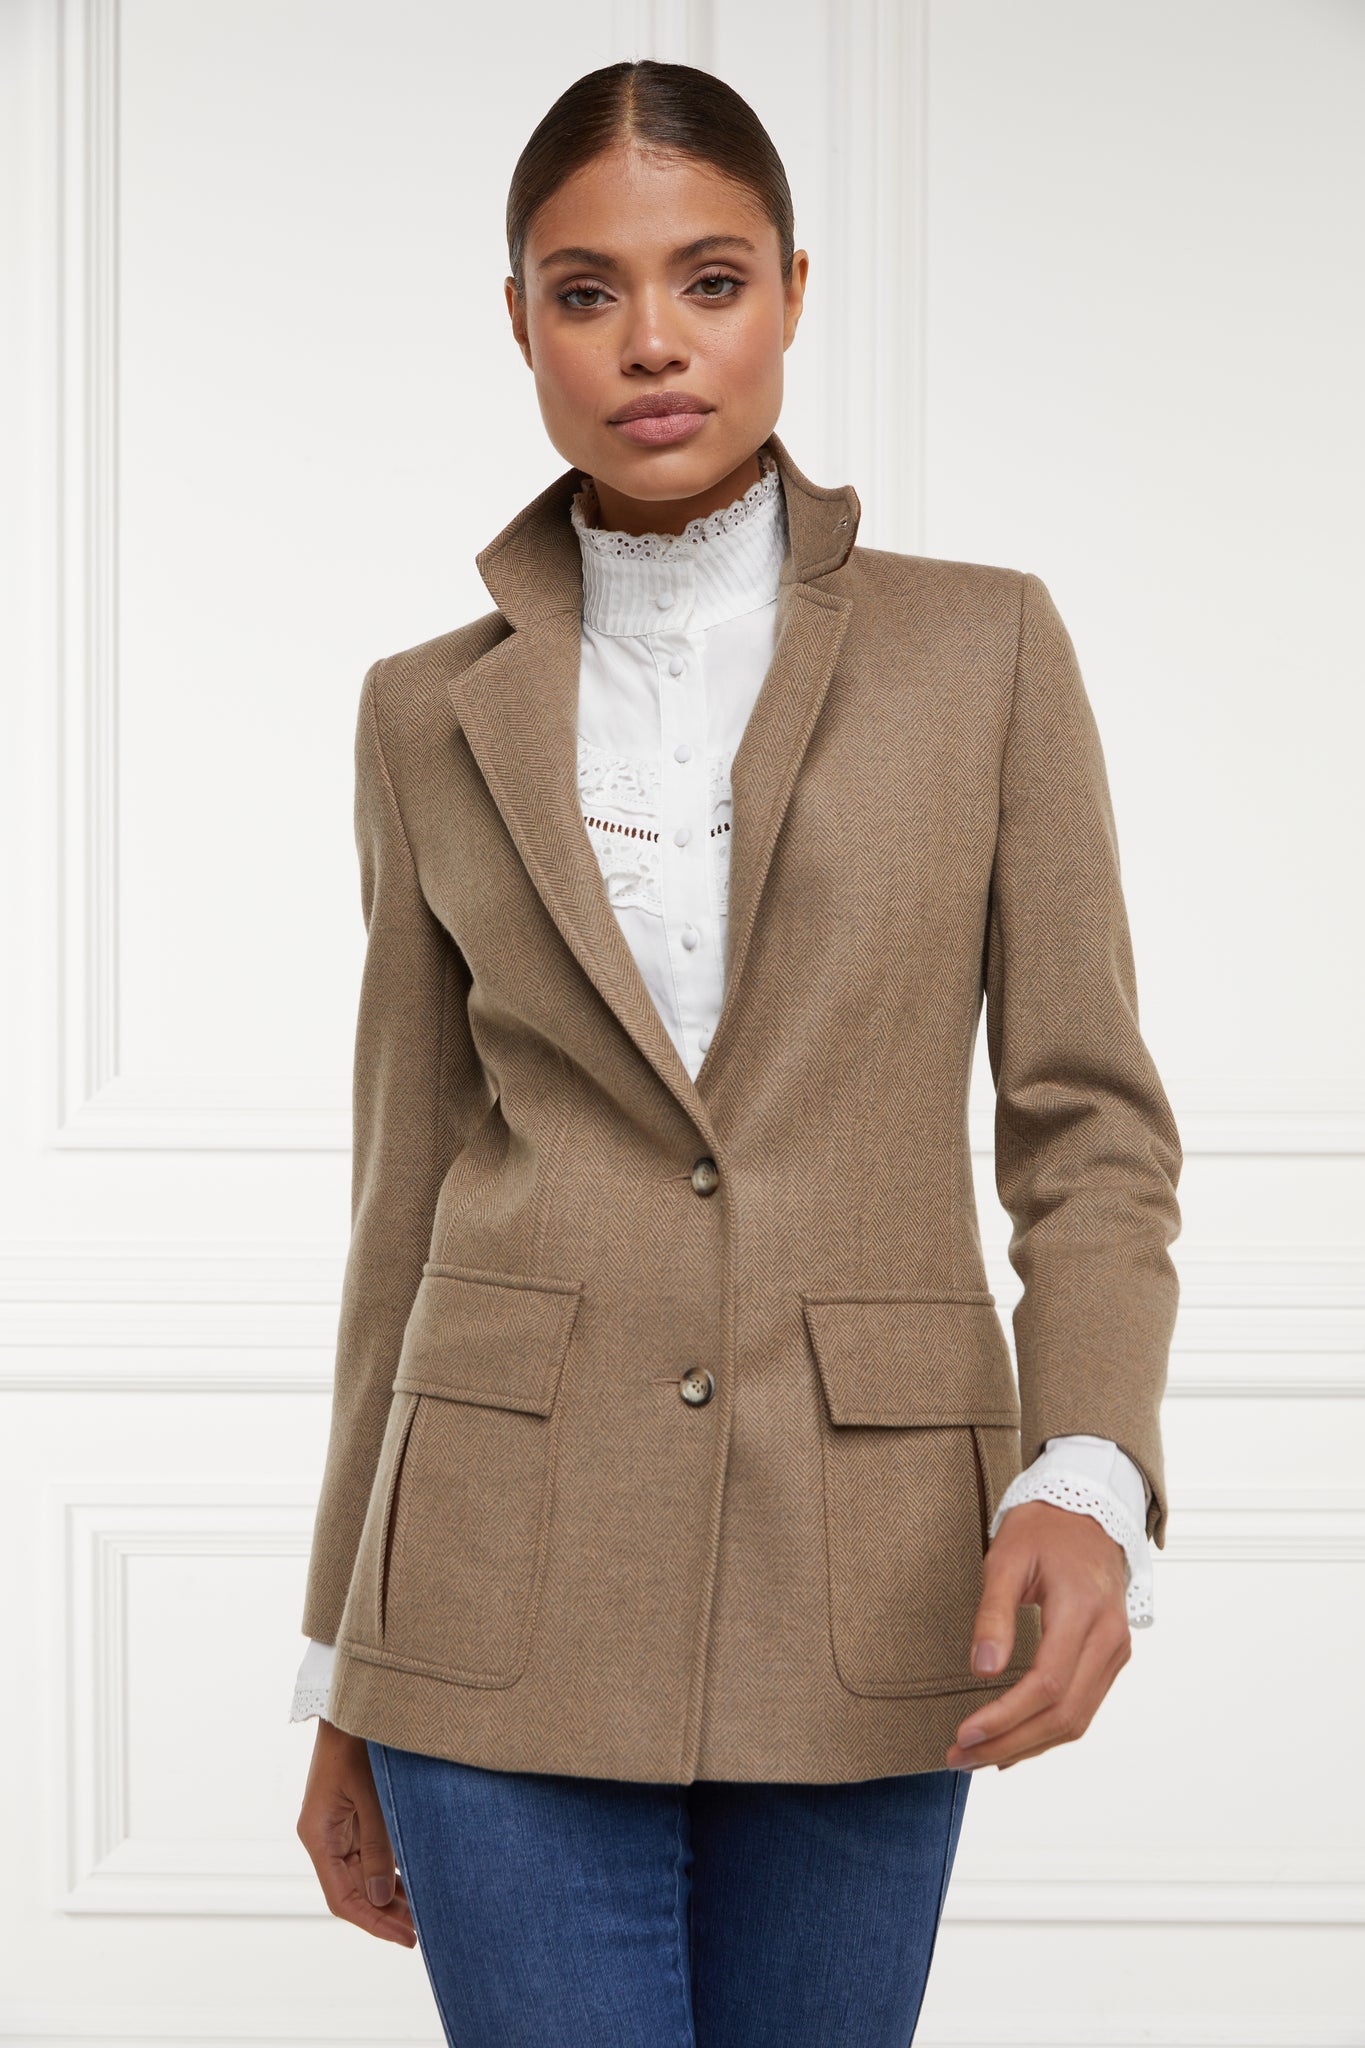 womens tailored fit single breasted blazer in camel herringbone with patch pockets and contrast tan suede elbow patches and underside collar